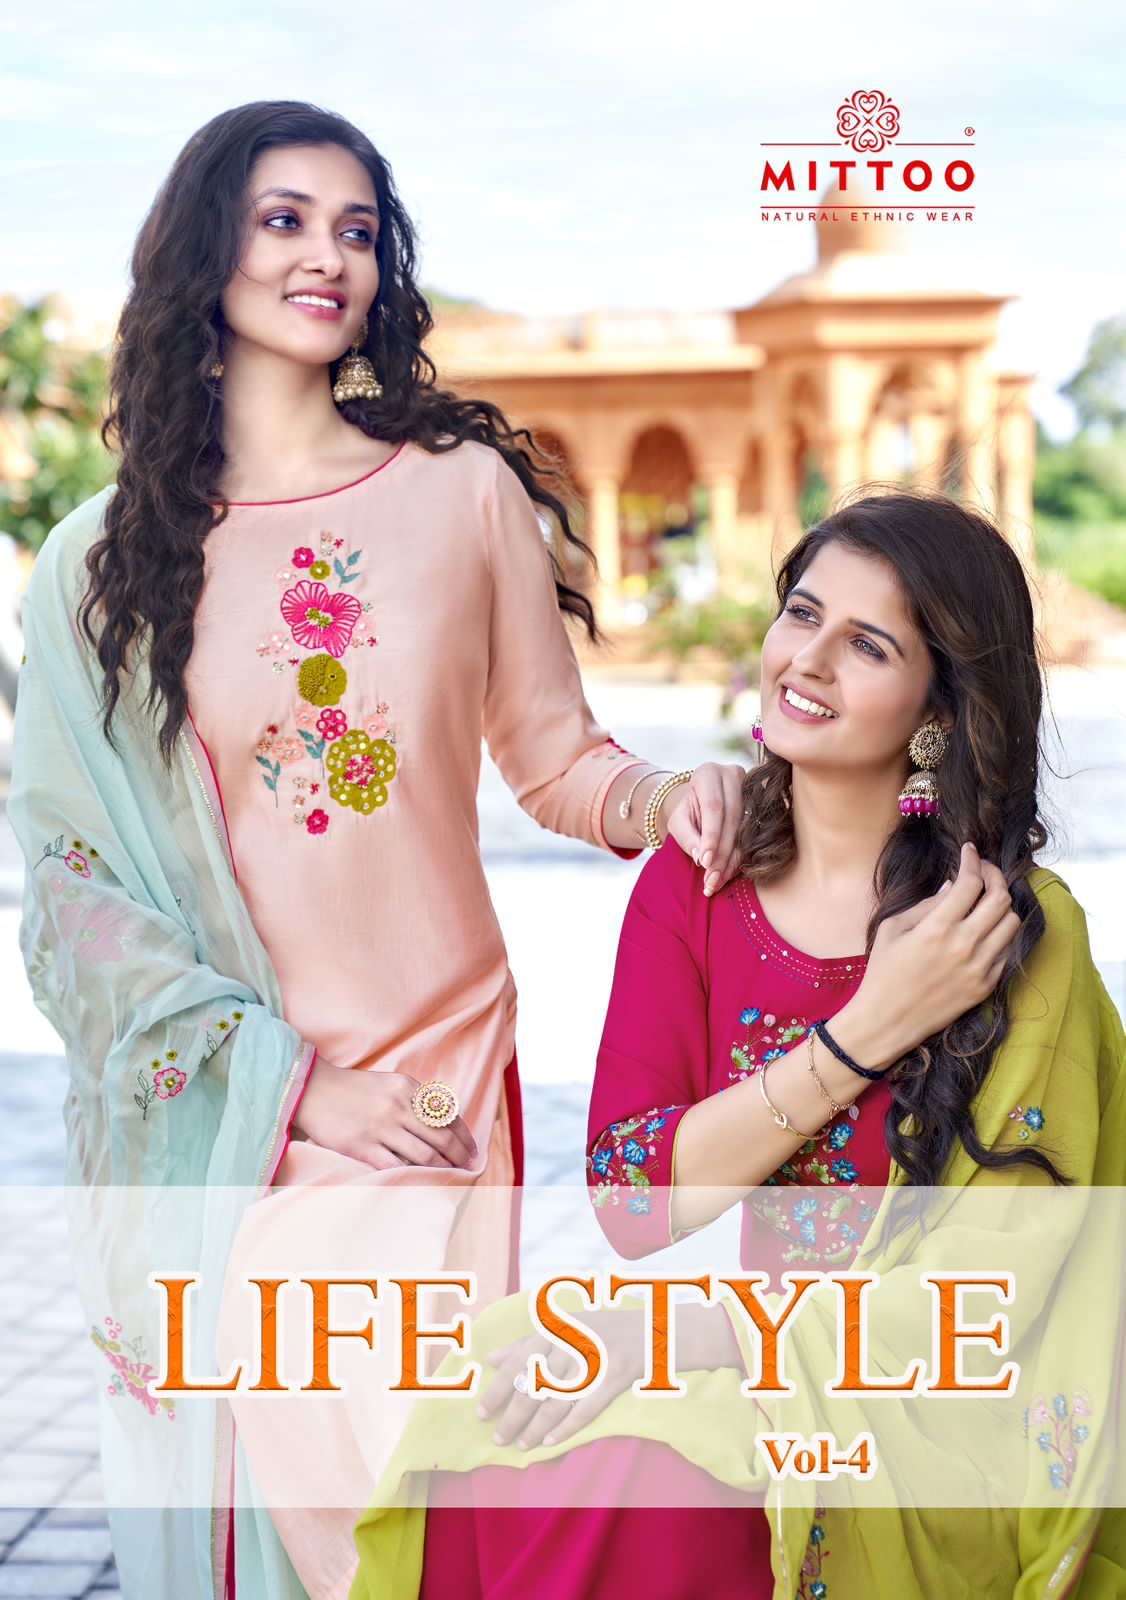 Mittoo Life Style Vol 4 collection 8